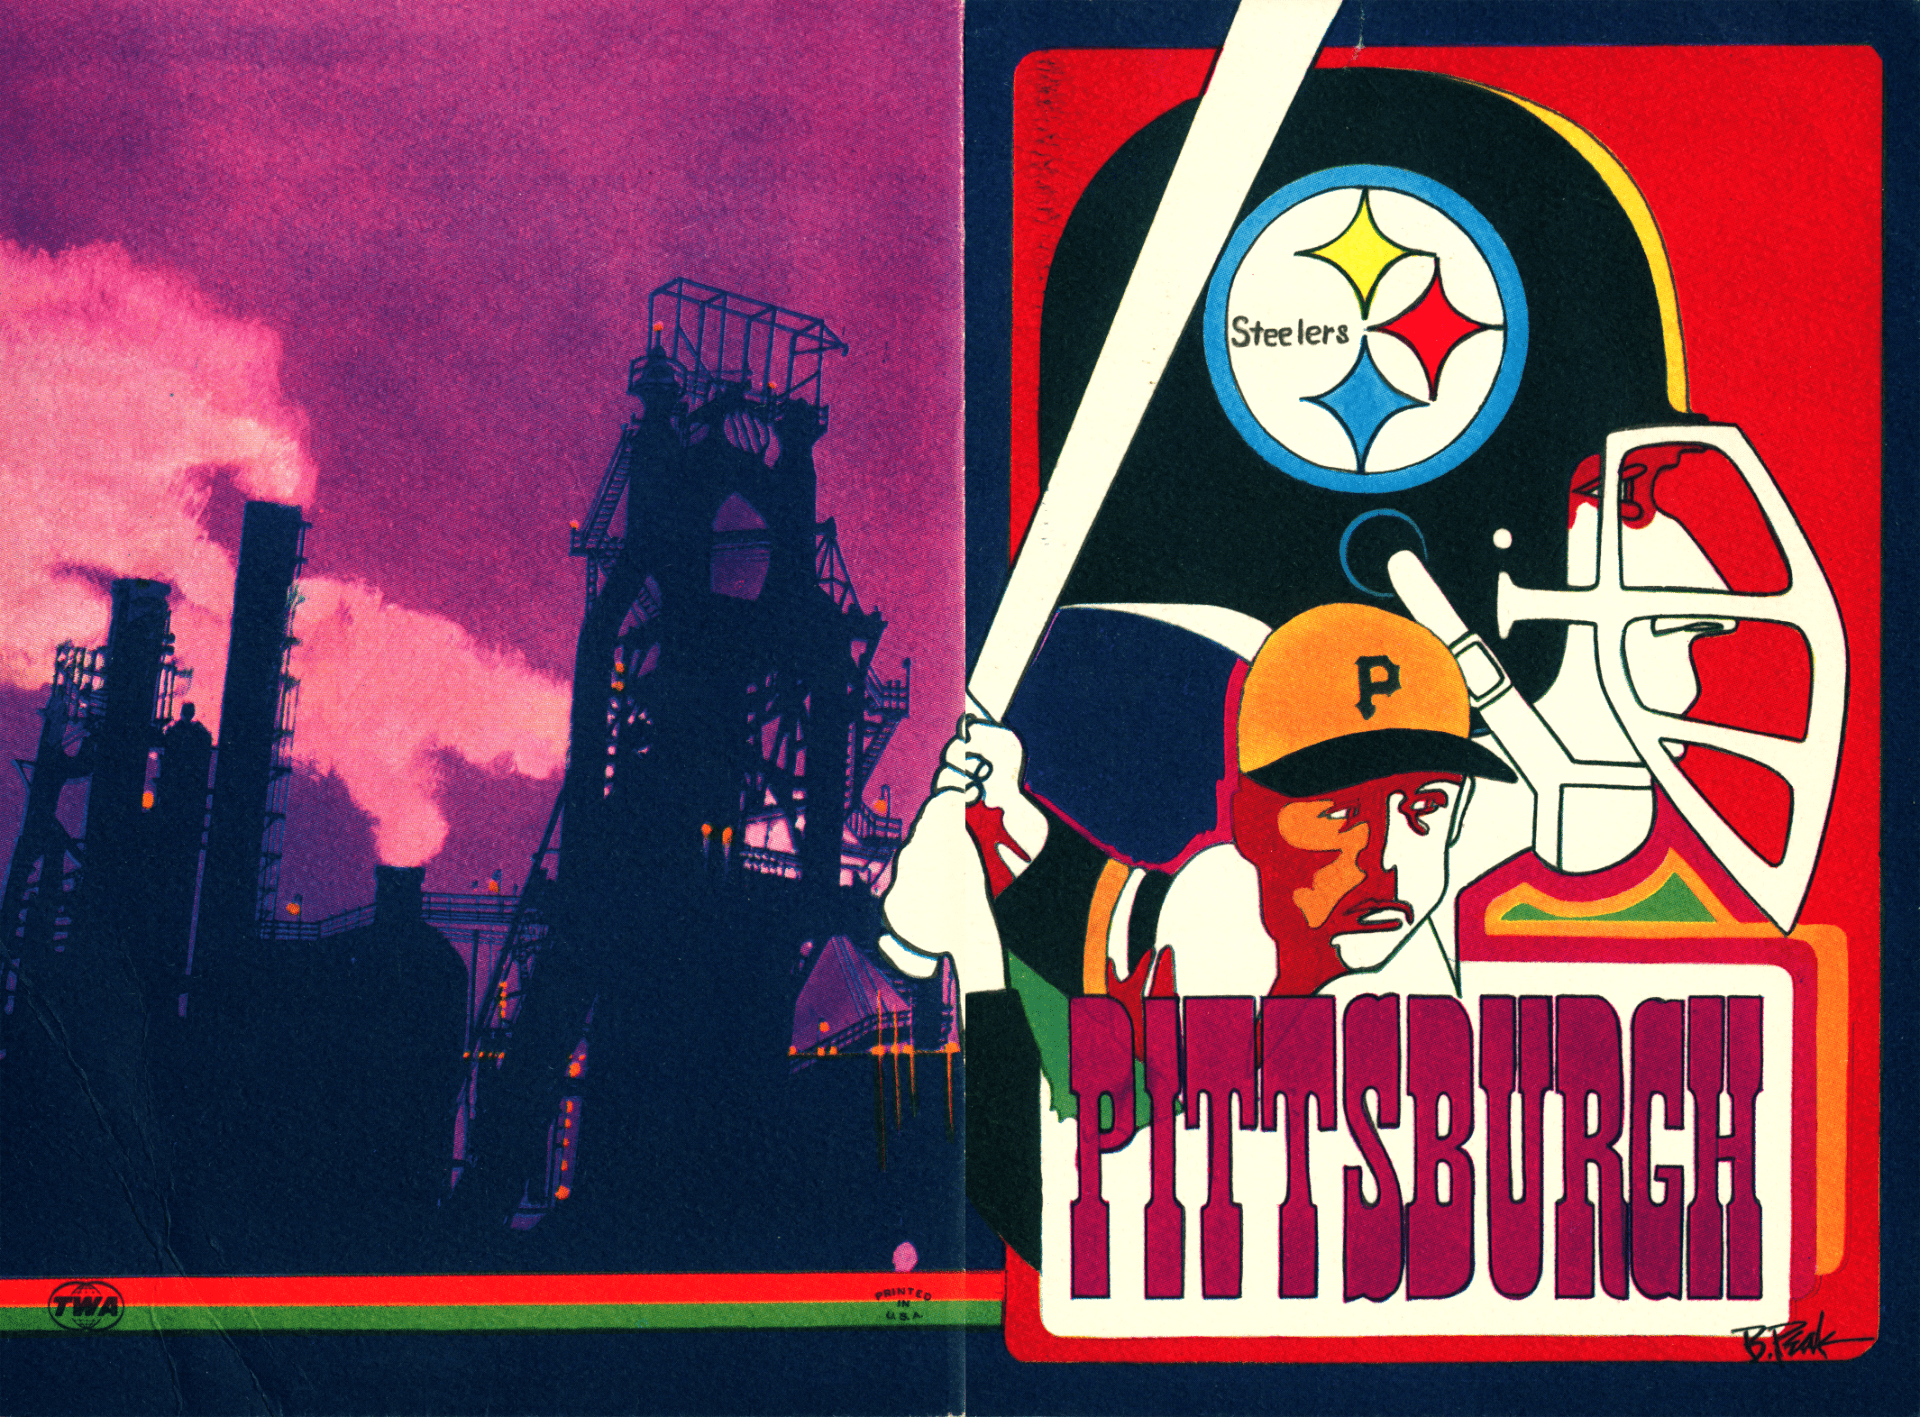 a football player in profile behind a baseball player about to take a swing with their bat. Nest to them is the silhouette of industrial buildings and smokestacks against the sky